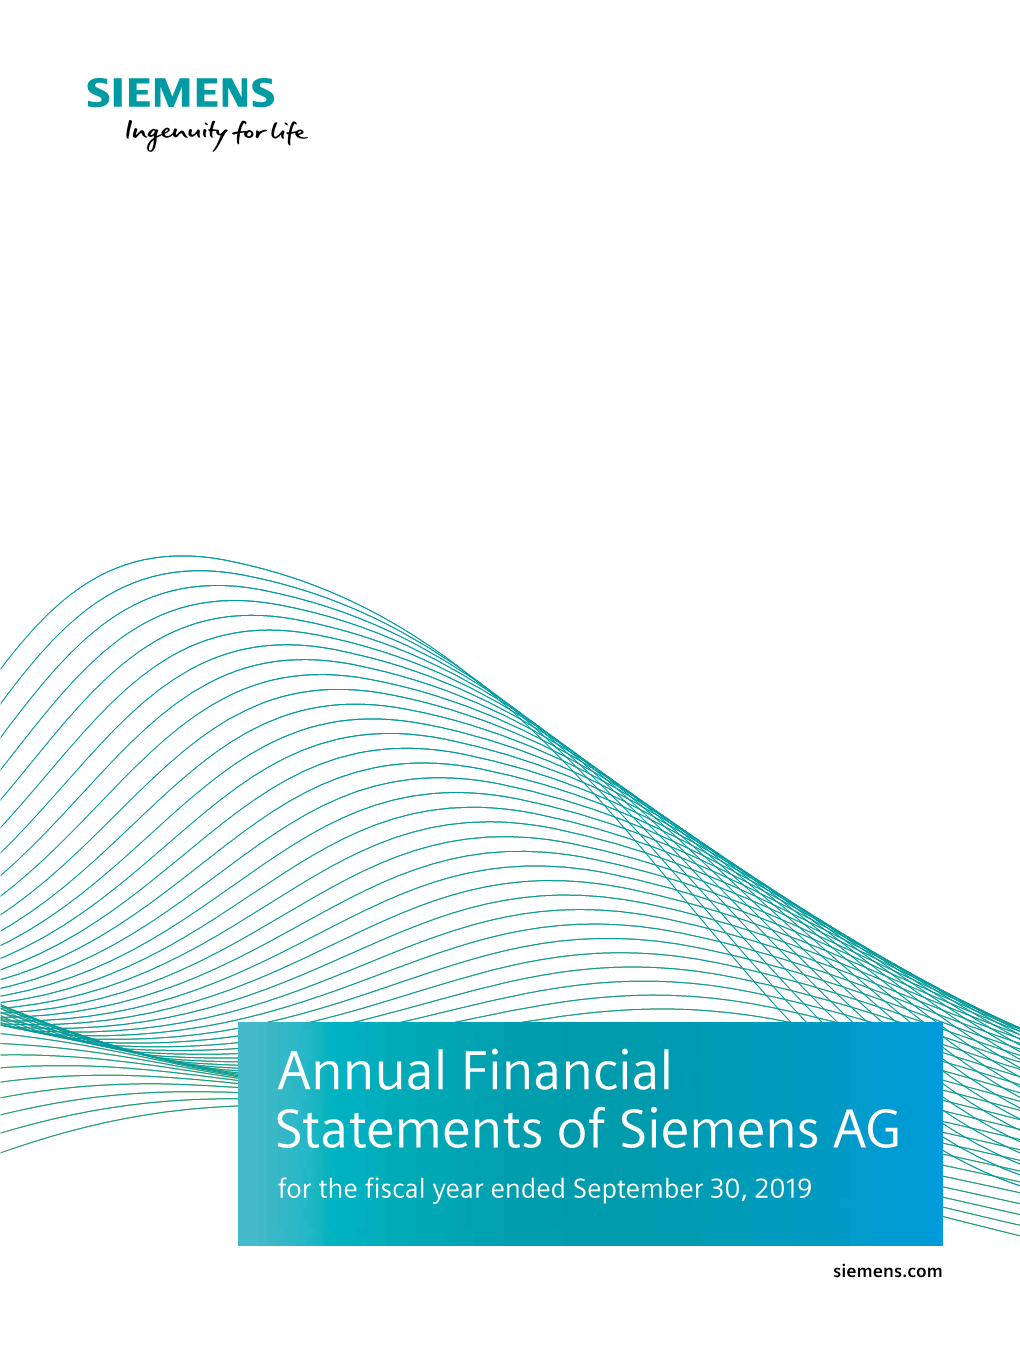 Annual Financial Statements of Siemens AG